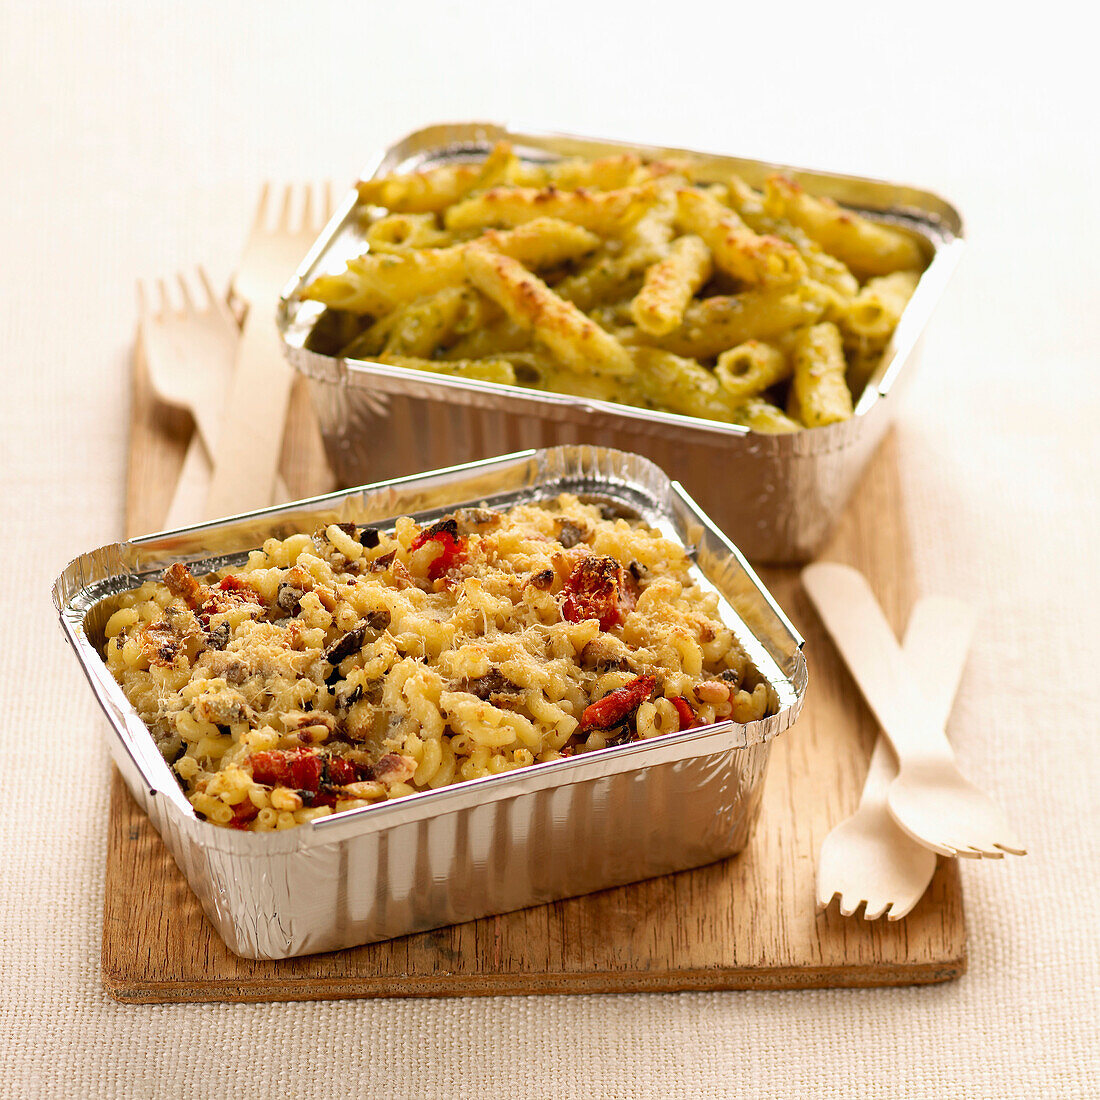 pasta shell bake and penne pasta bake (topic: bakes)